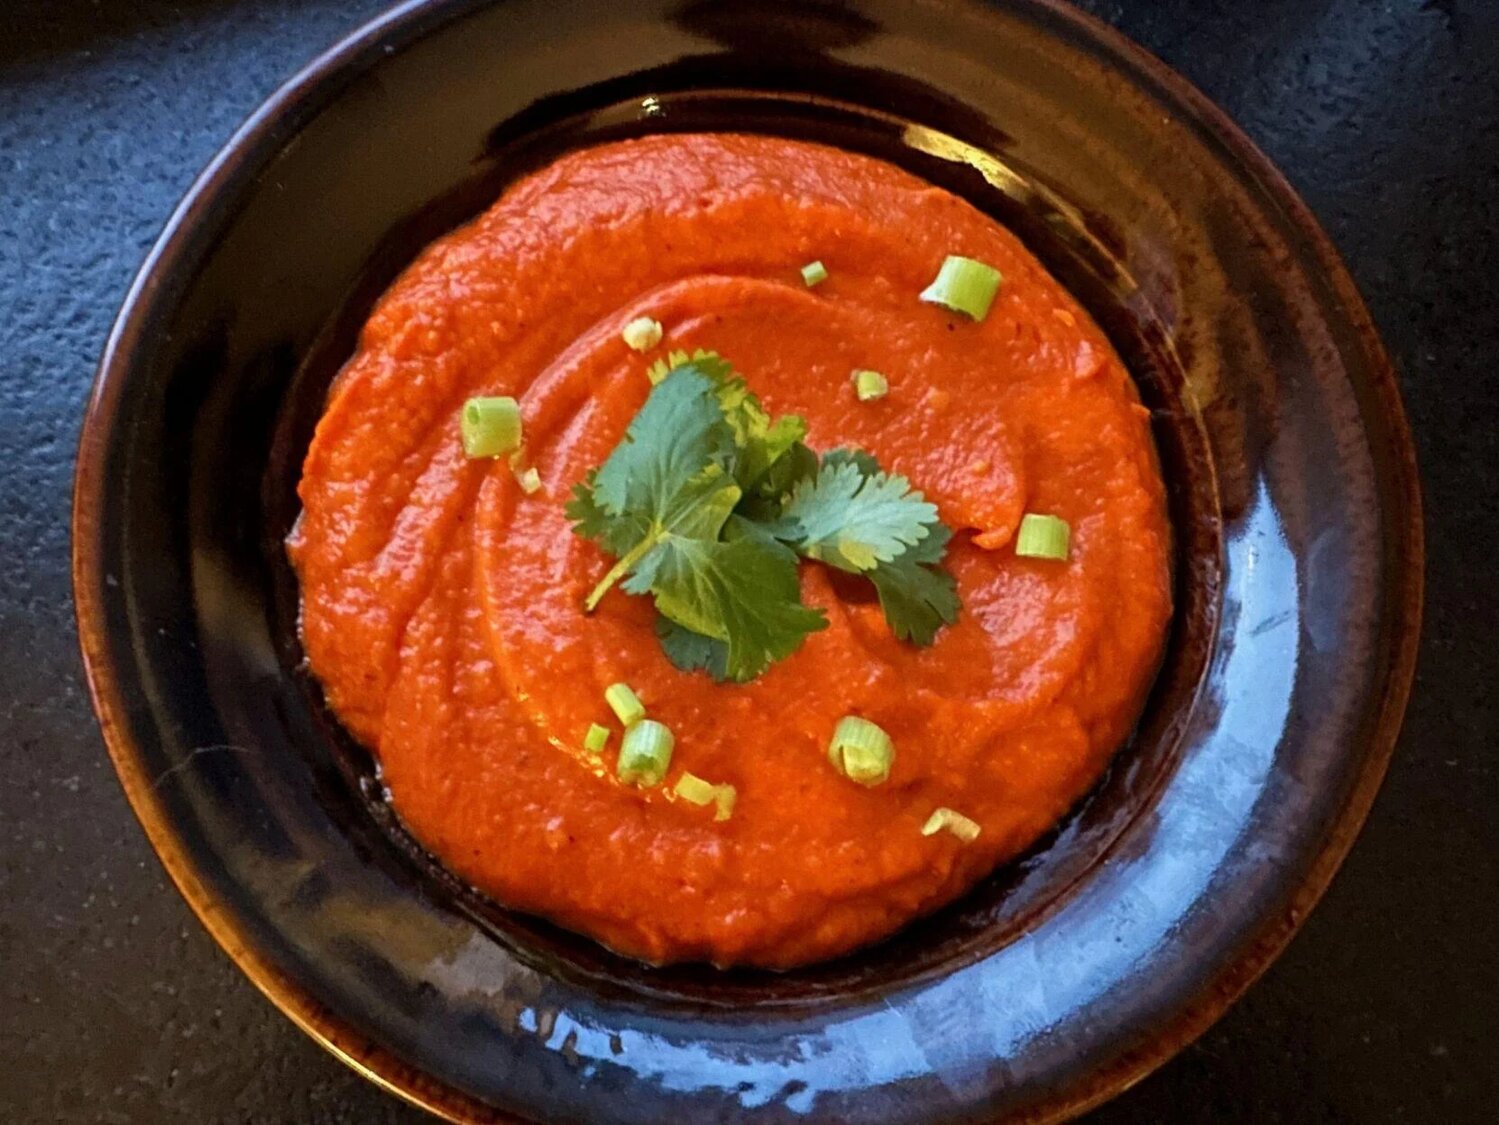 This bright and bold sauce is fit for your Thanksgiving table.